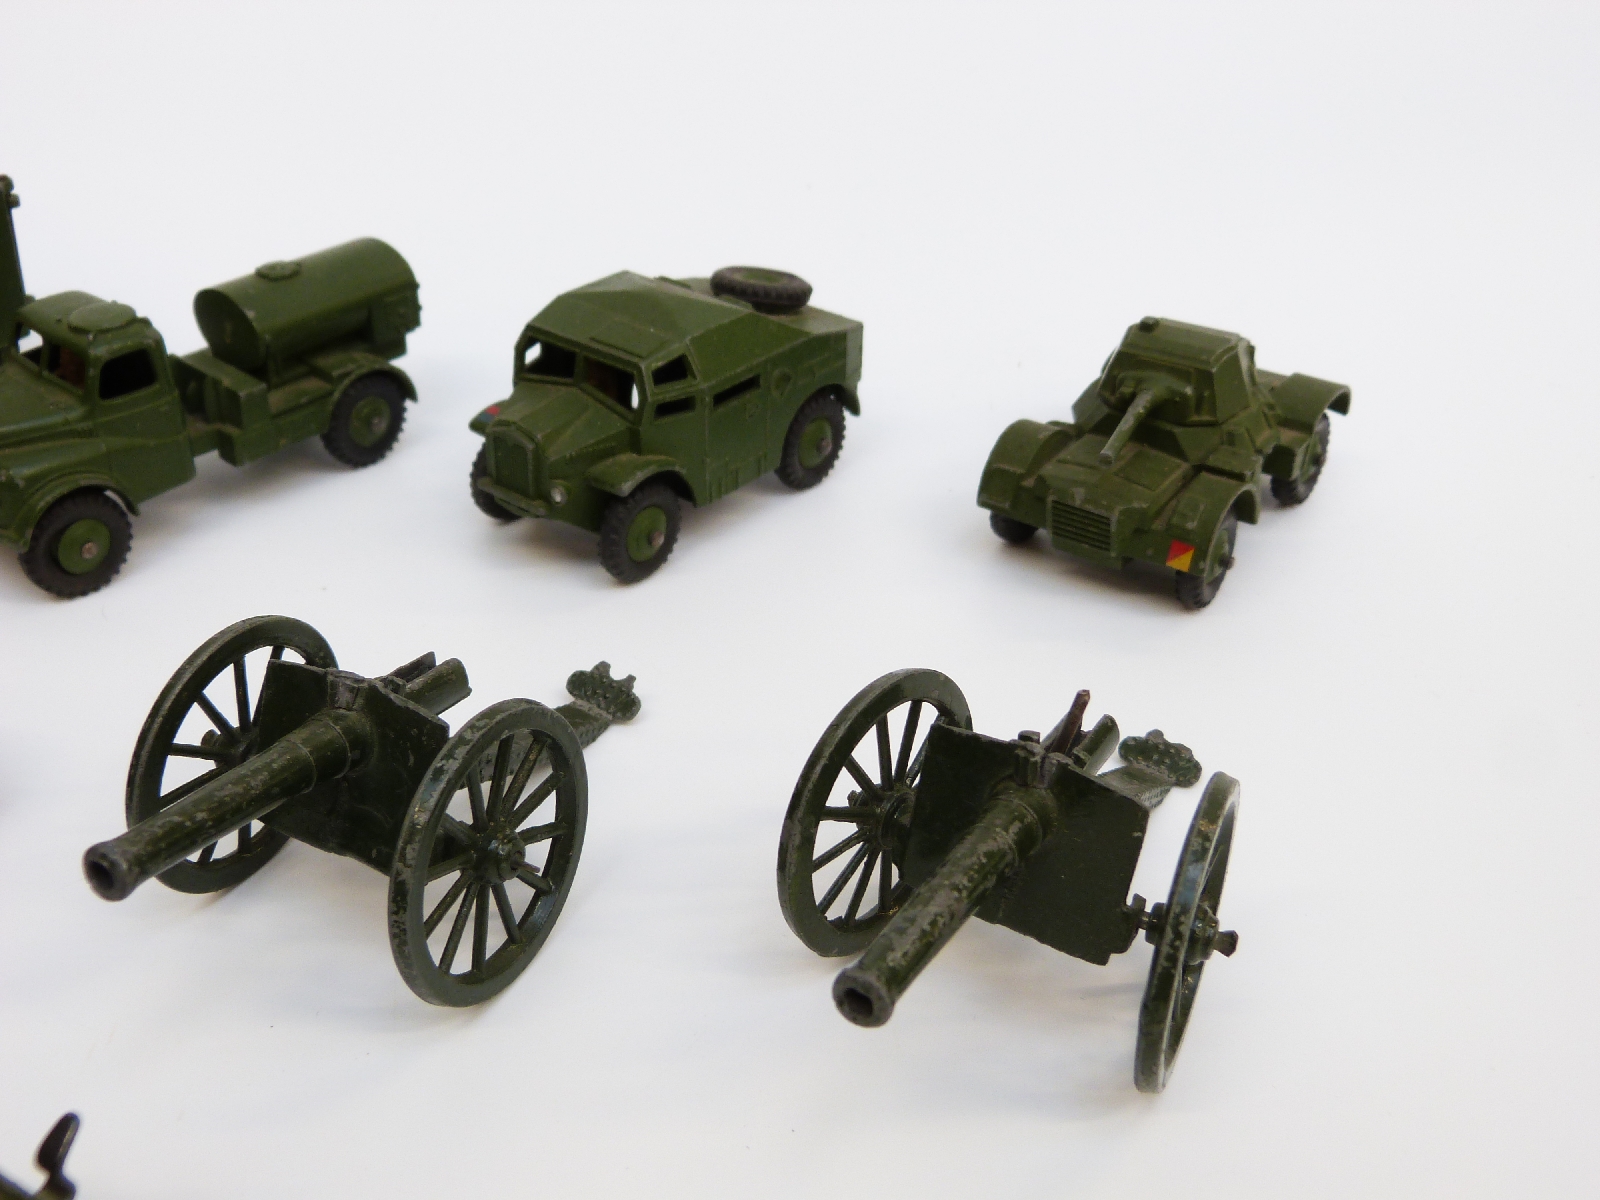 Ten Dinky Toys and Supertoys diecast model military vehicles including Military Ambulance, - Image 5 of 9